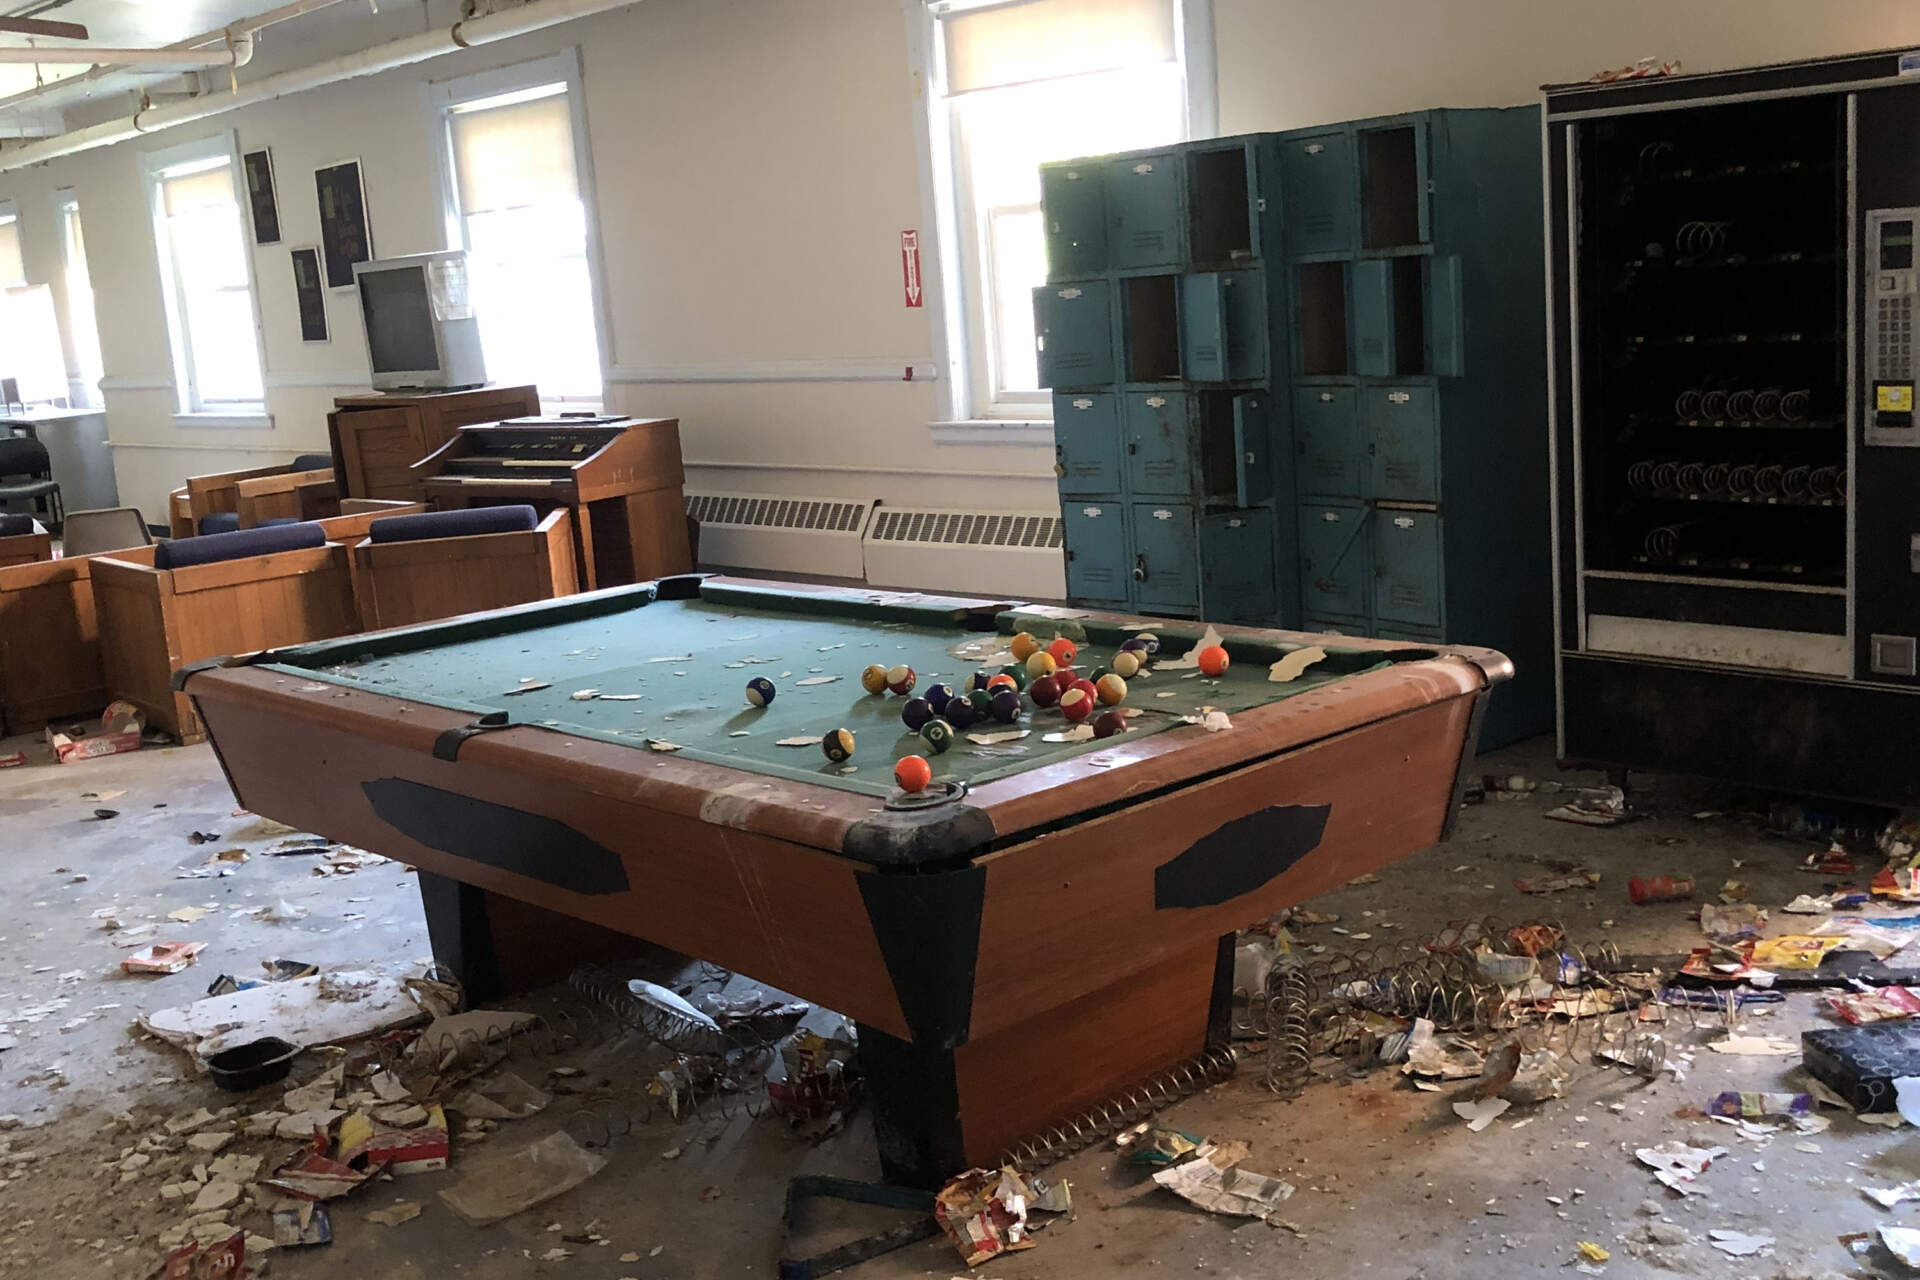 A room inside one of the buildings at the former Long Island recovery campus that has deteriorated over nearly a decade since social services there were shuttered when the city abruptly closed the bridge to the island. (Deborah Becker/WBUR)